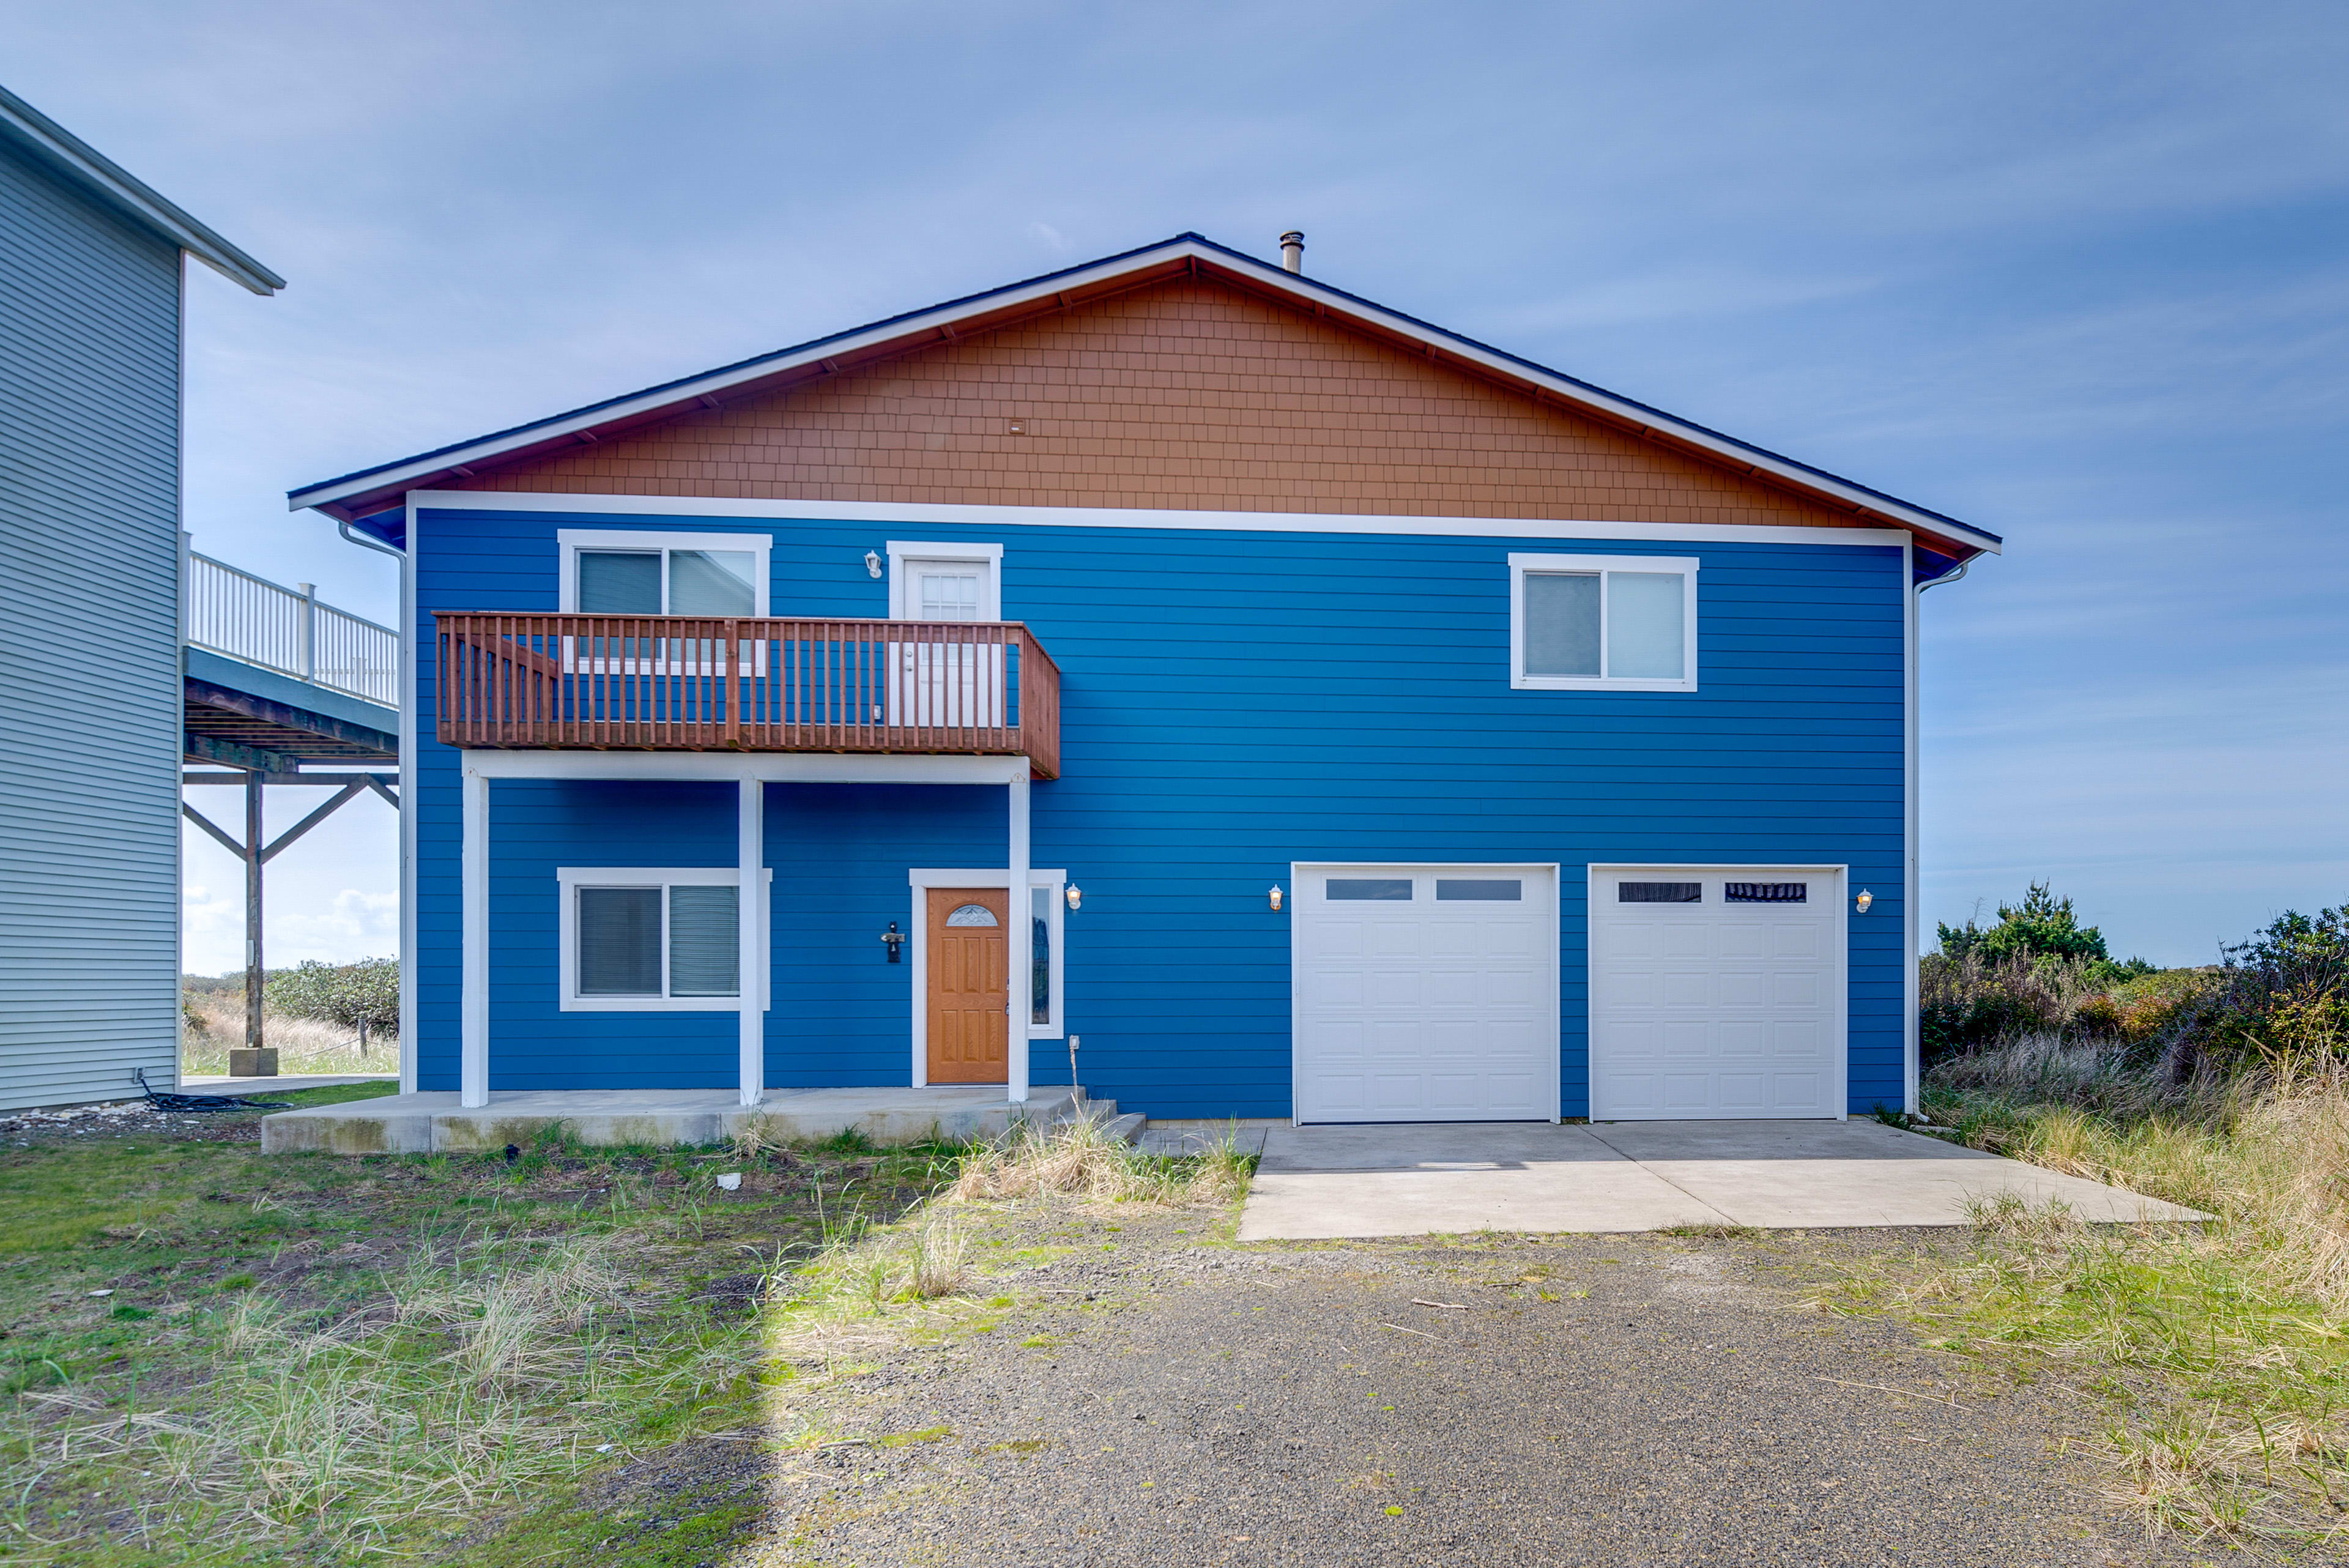 Ocean Shores Vacation Rental | 4BR | 2.5BA | 2,800 Sq Ft | 3 Steps Required